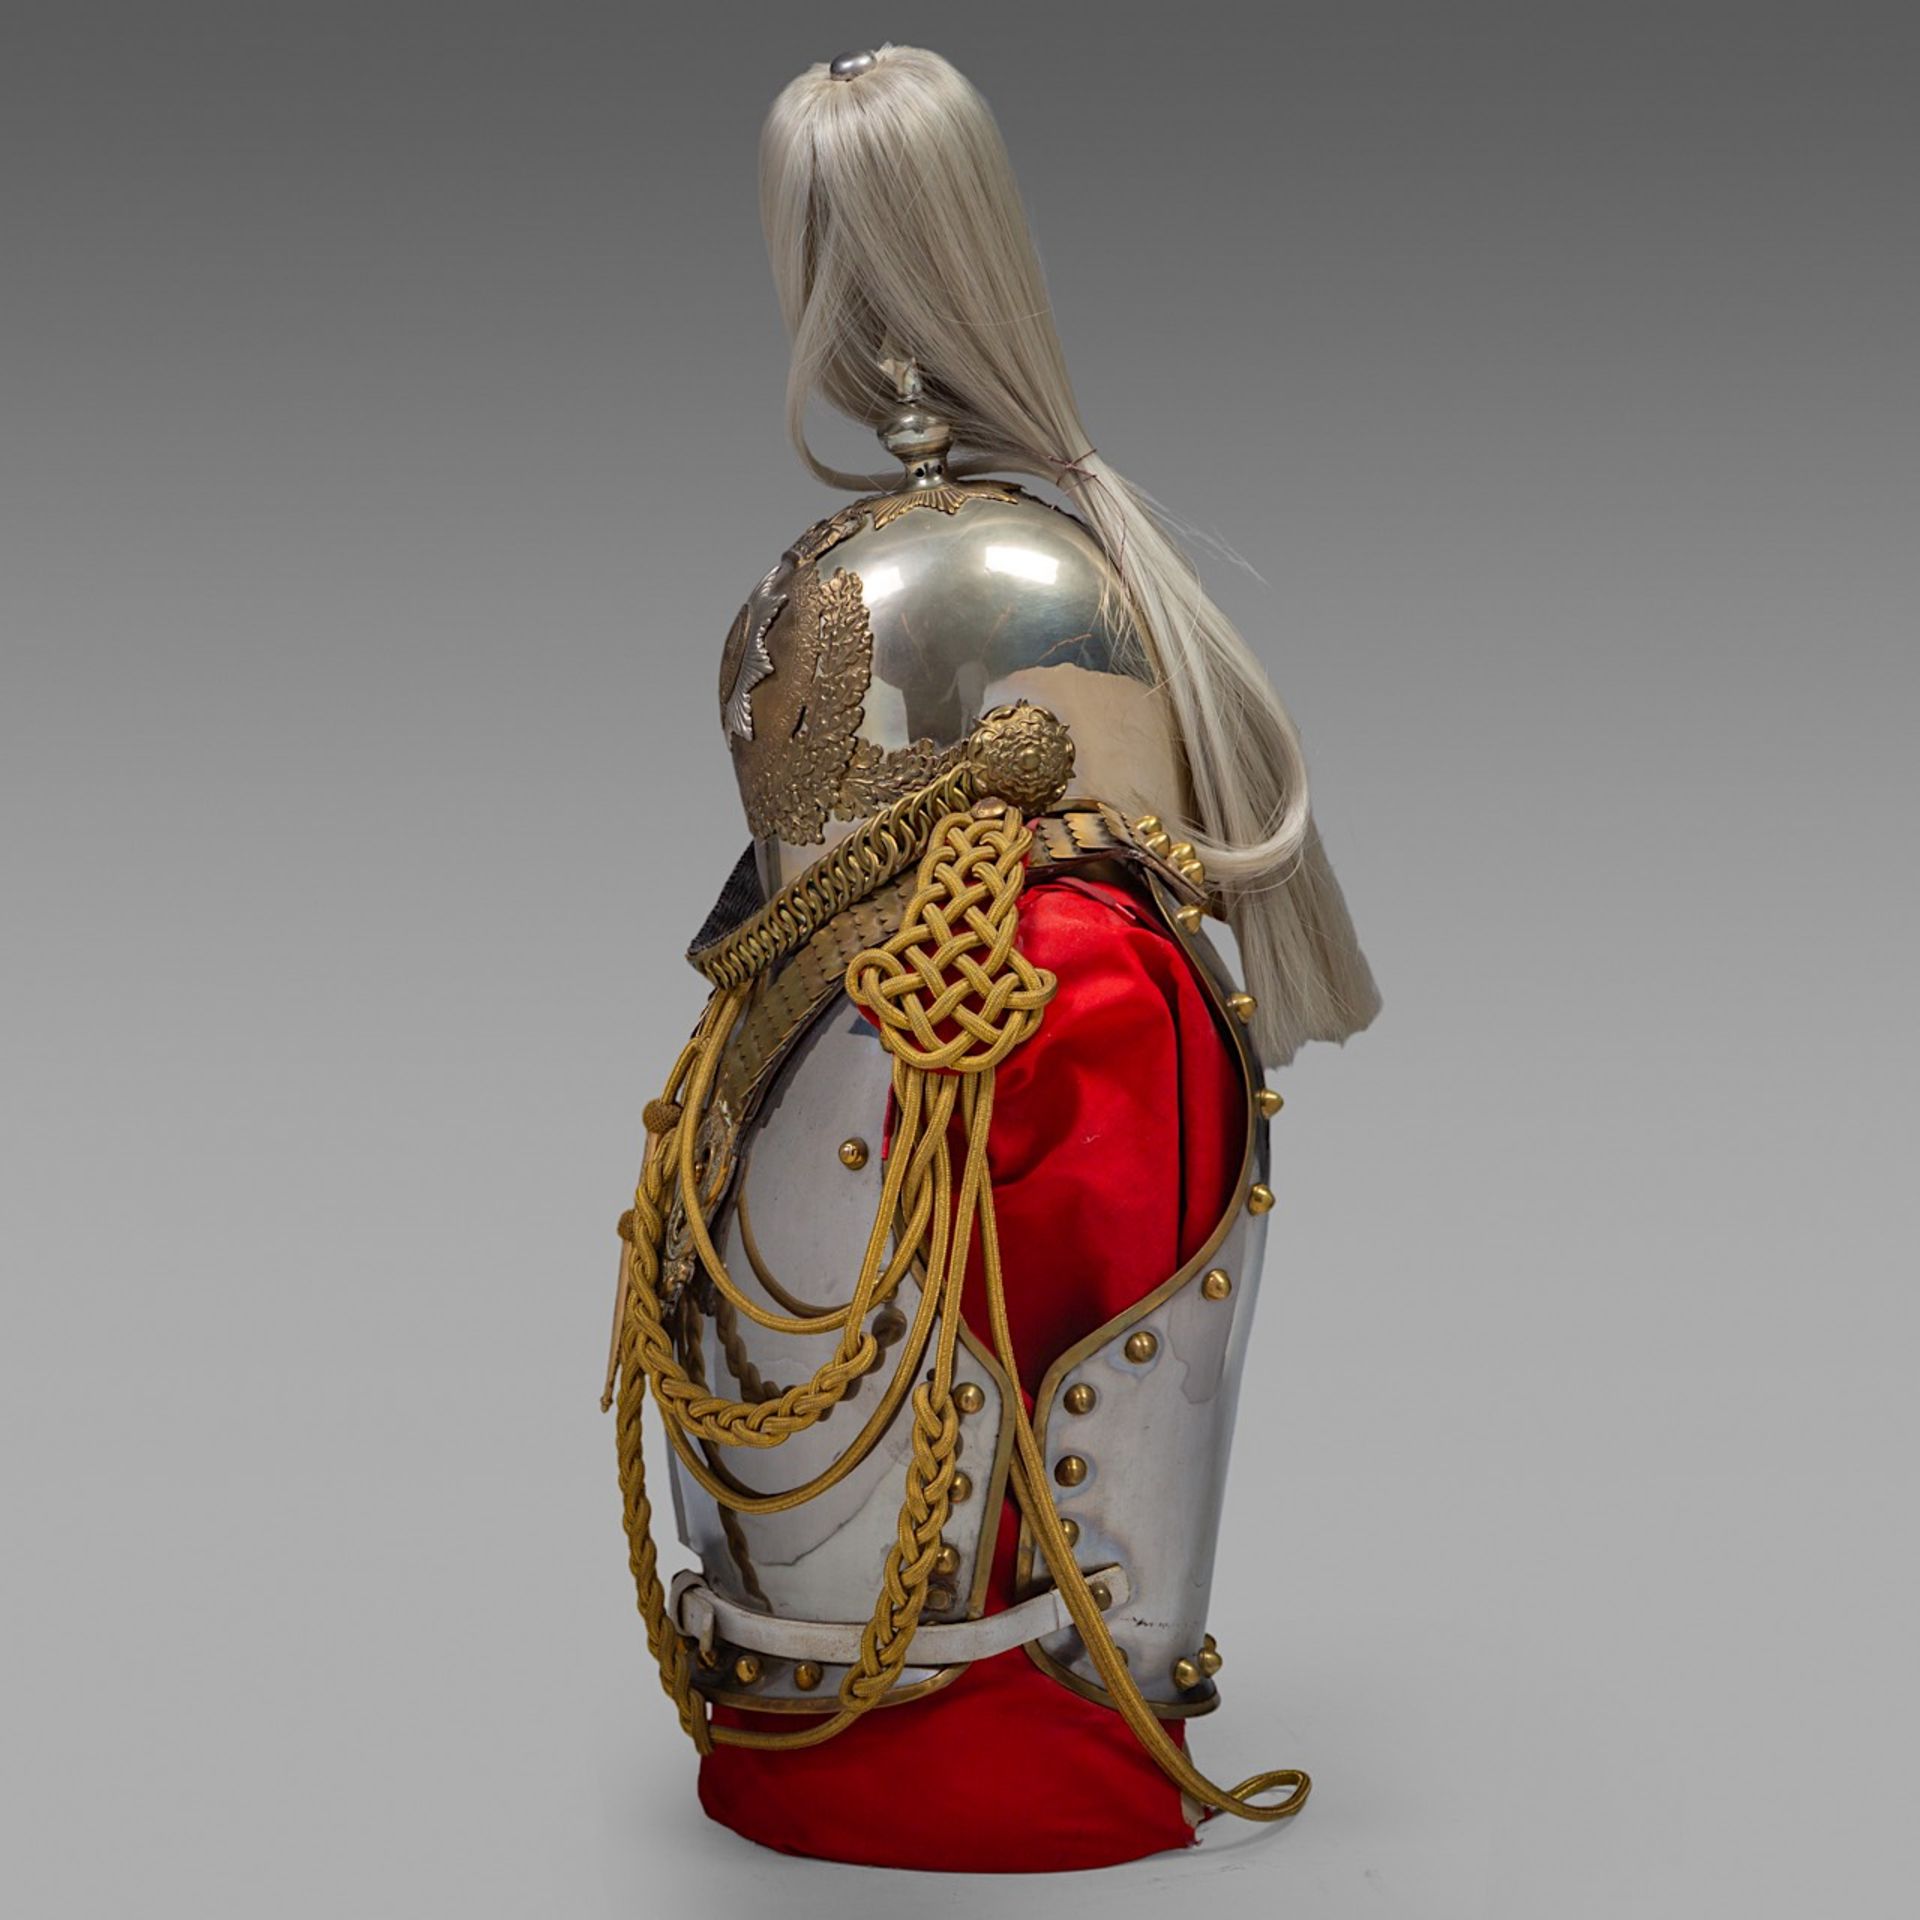 cuirass and helmet of the Royal Horse guards, metal and brass,1952 (Eliabeth II) 88 x 36 x 44 cm. (3 - Bild 3 aus 6